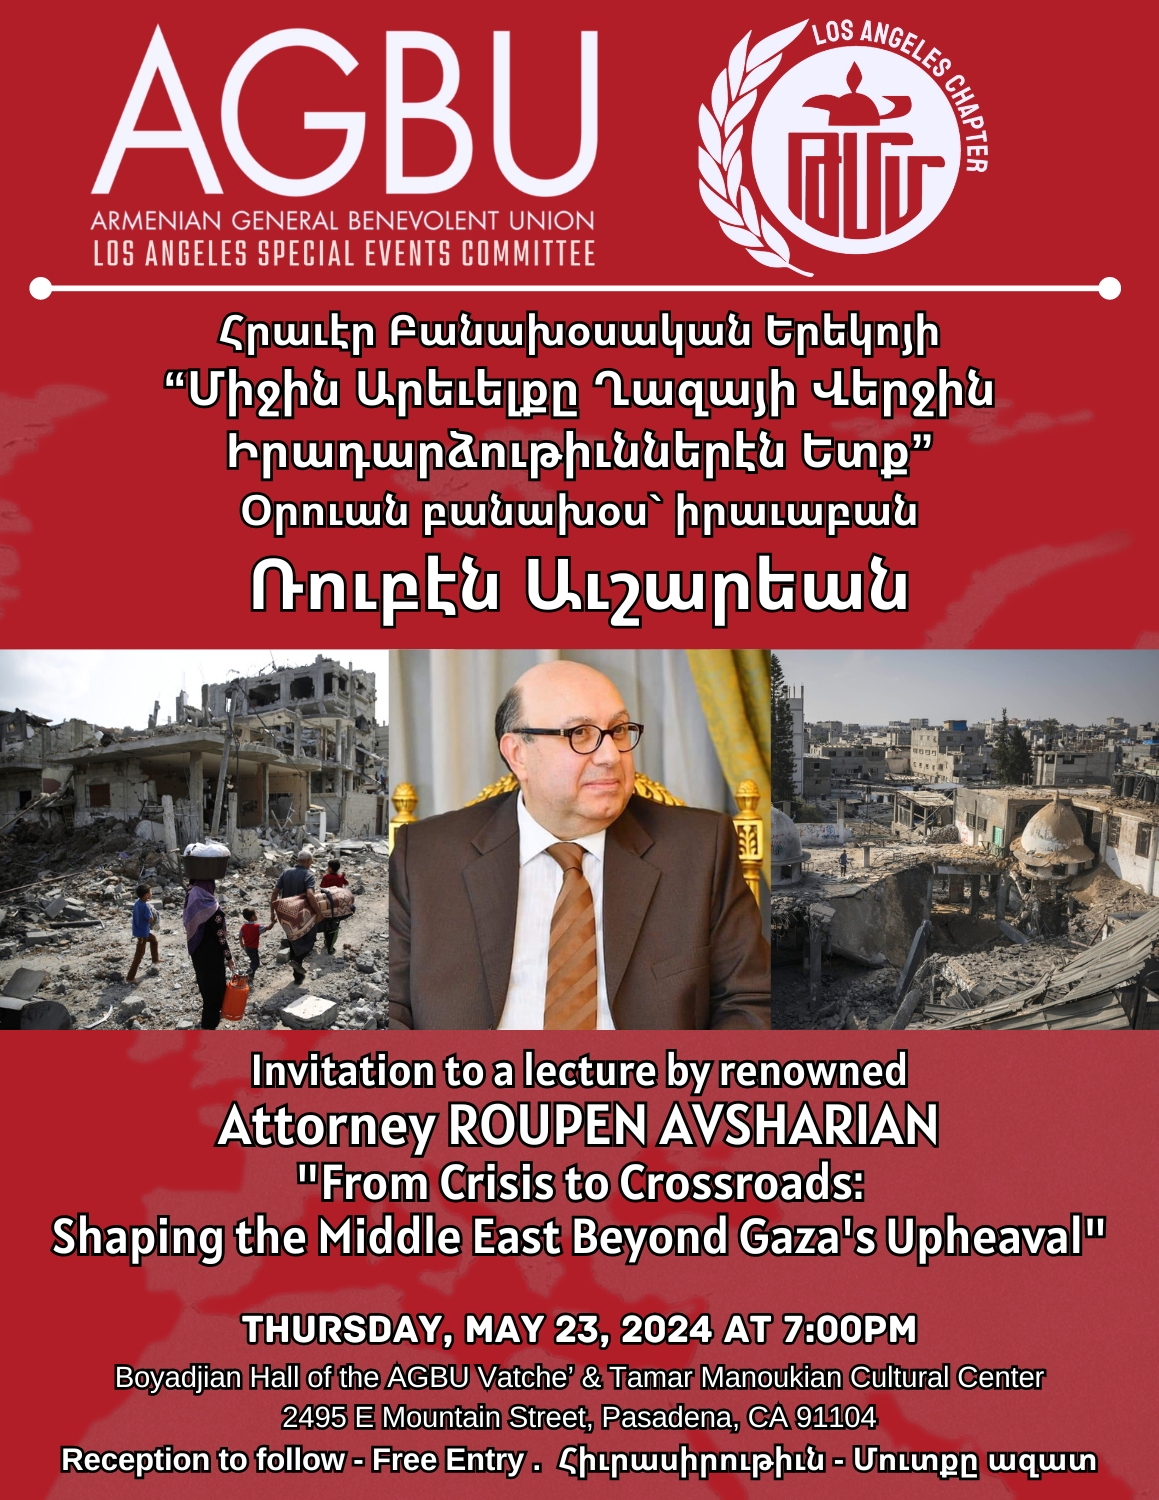 Lecture “Shaping the Middle East Beyond Gaza’s Upheaval”